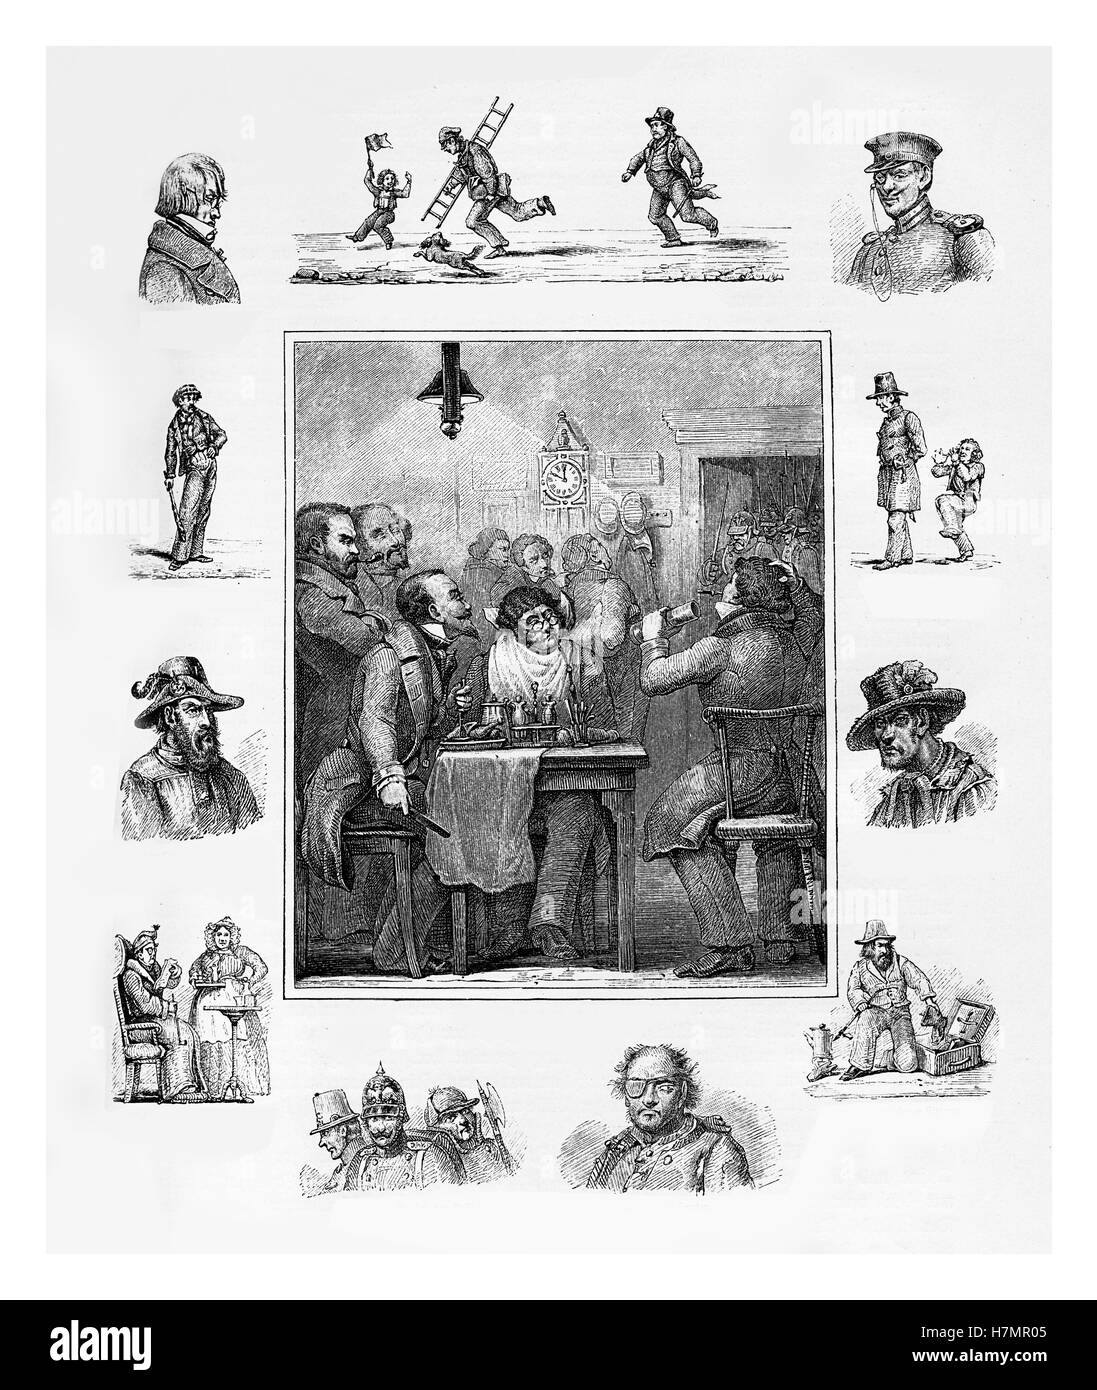 Year 1848 Berlin, street scenes, indoors and outdoors types and character caricatures Stock Photo